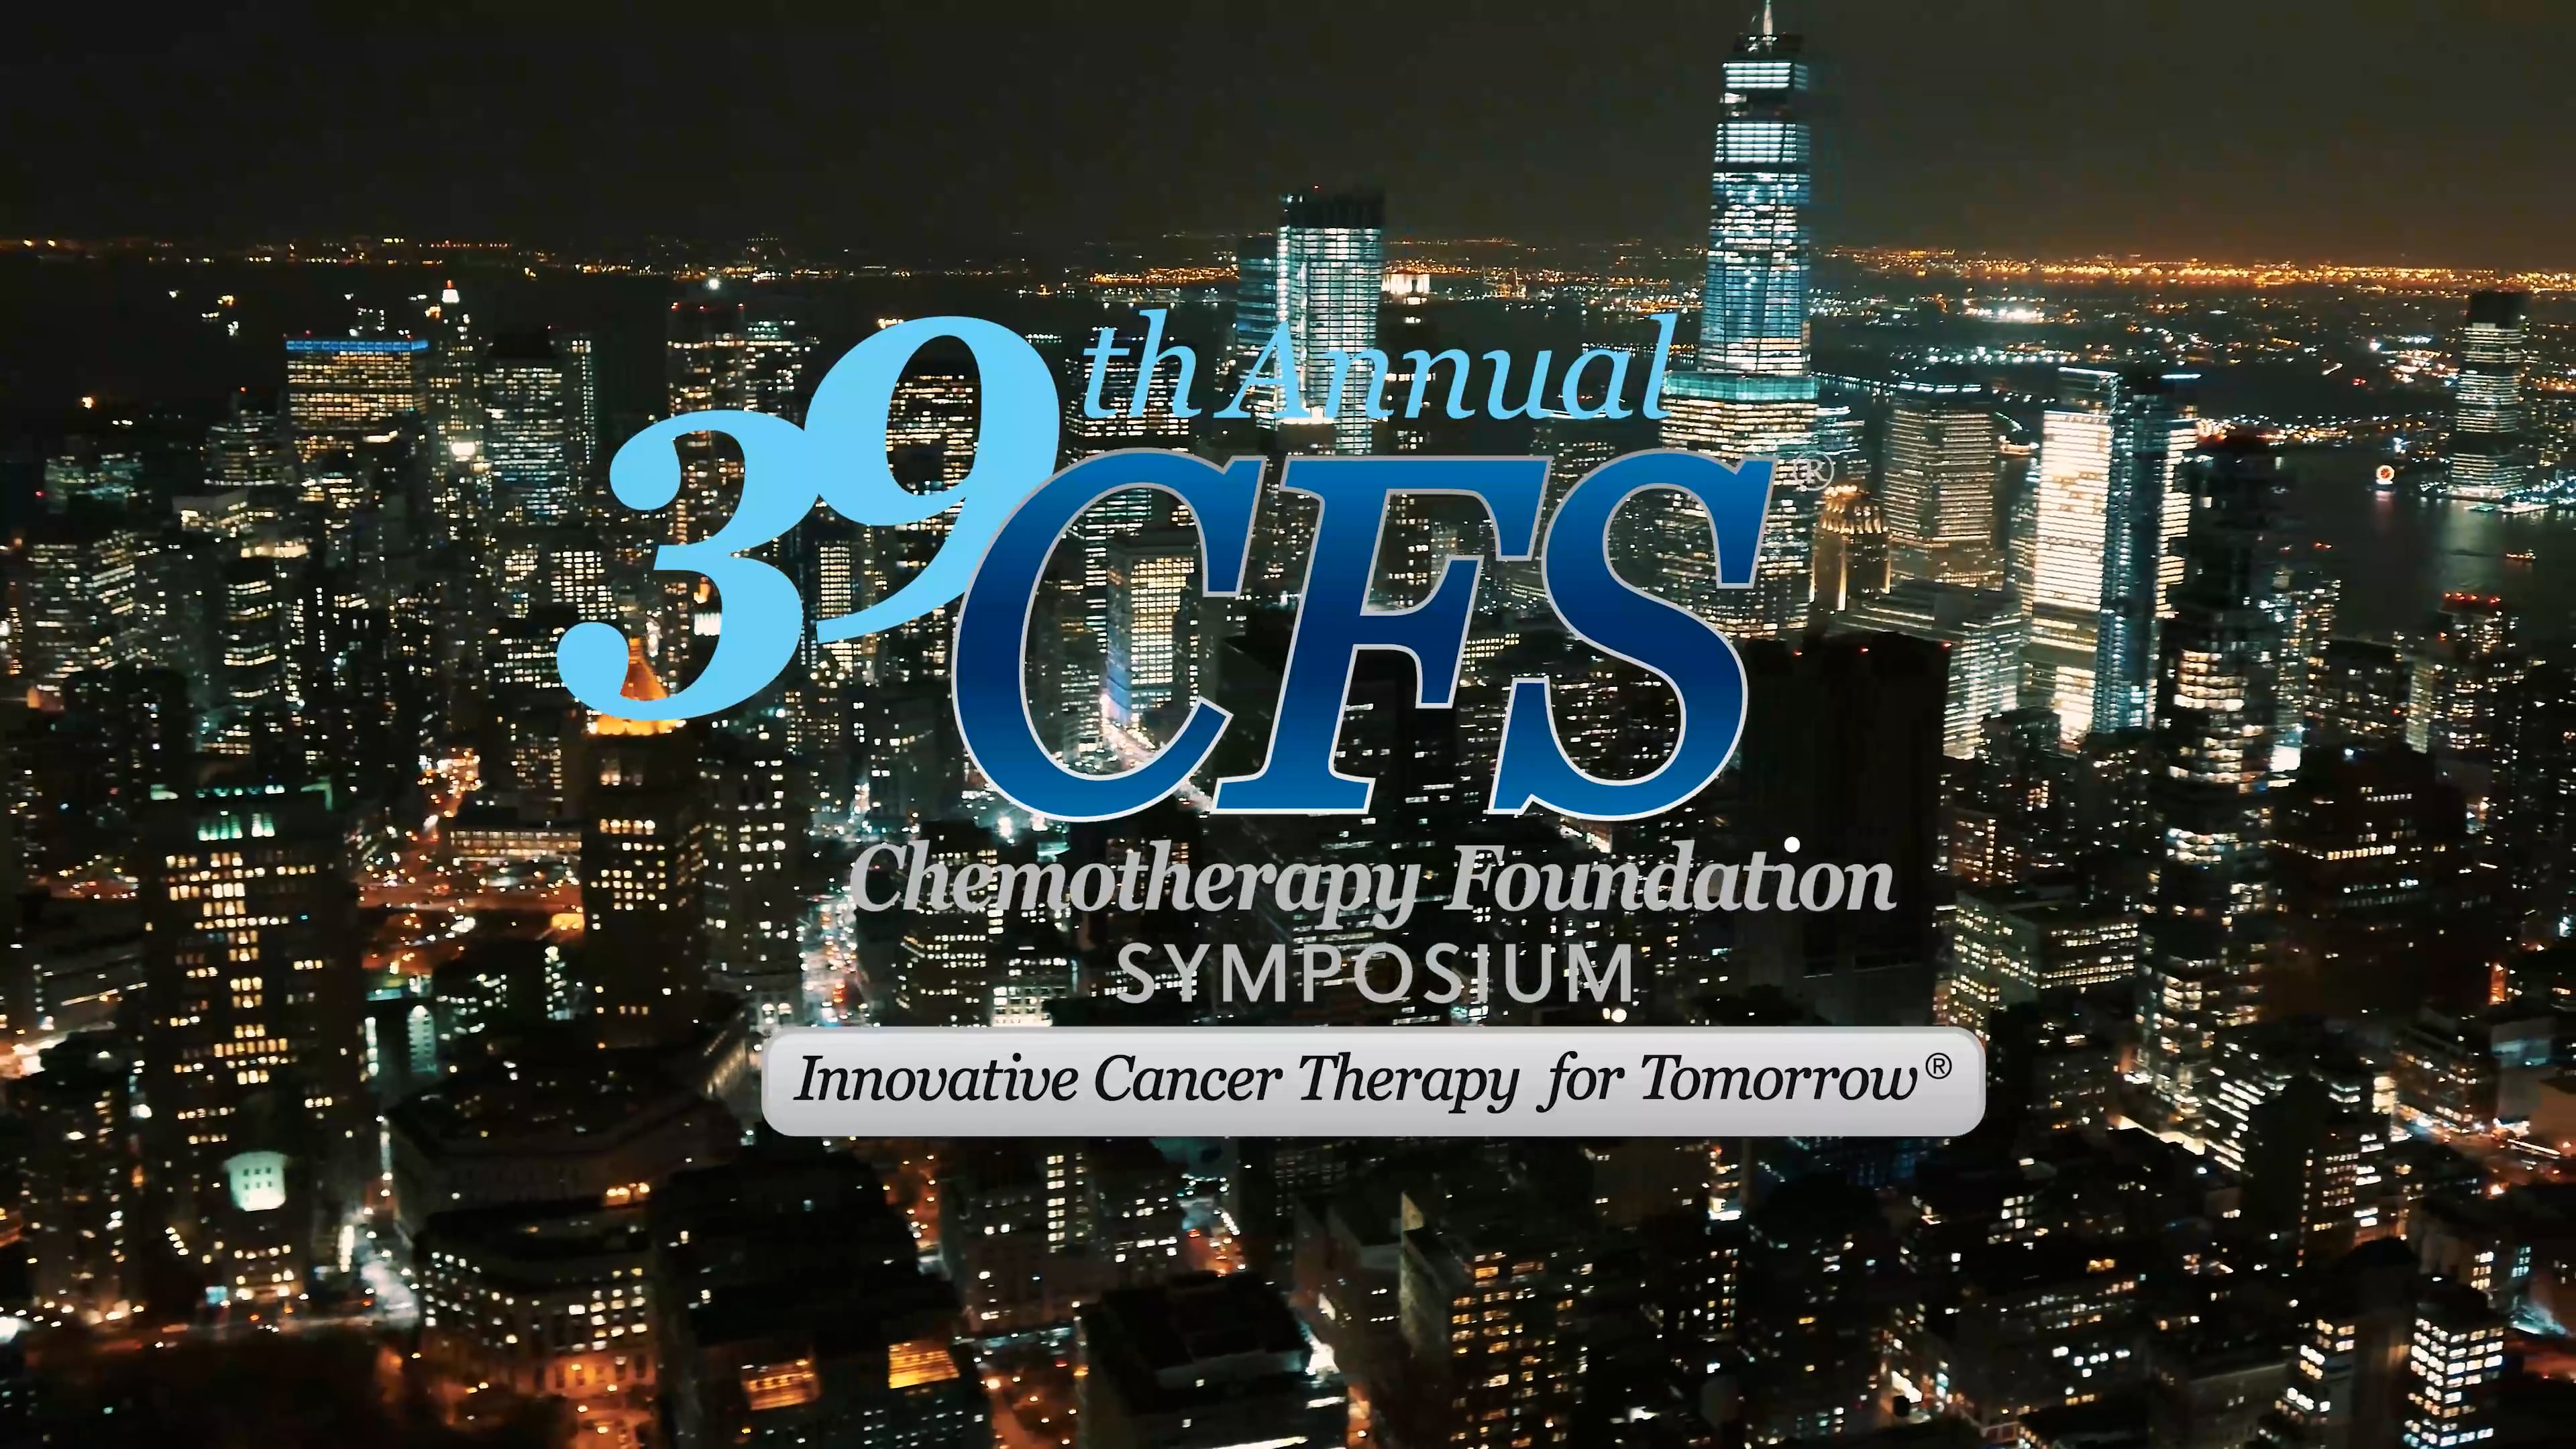 PER Chemotherapy Foundation Symposium (CFS) Conference video by